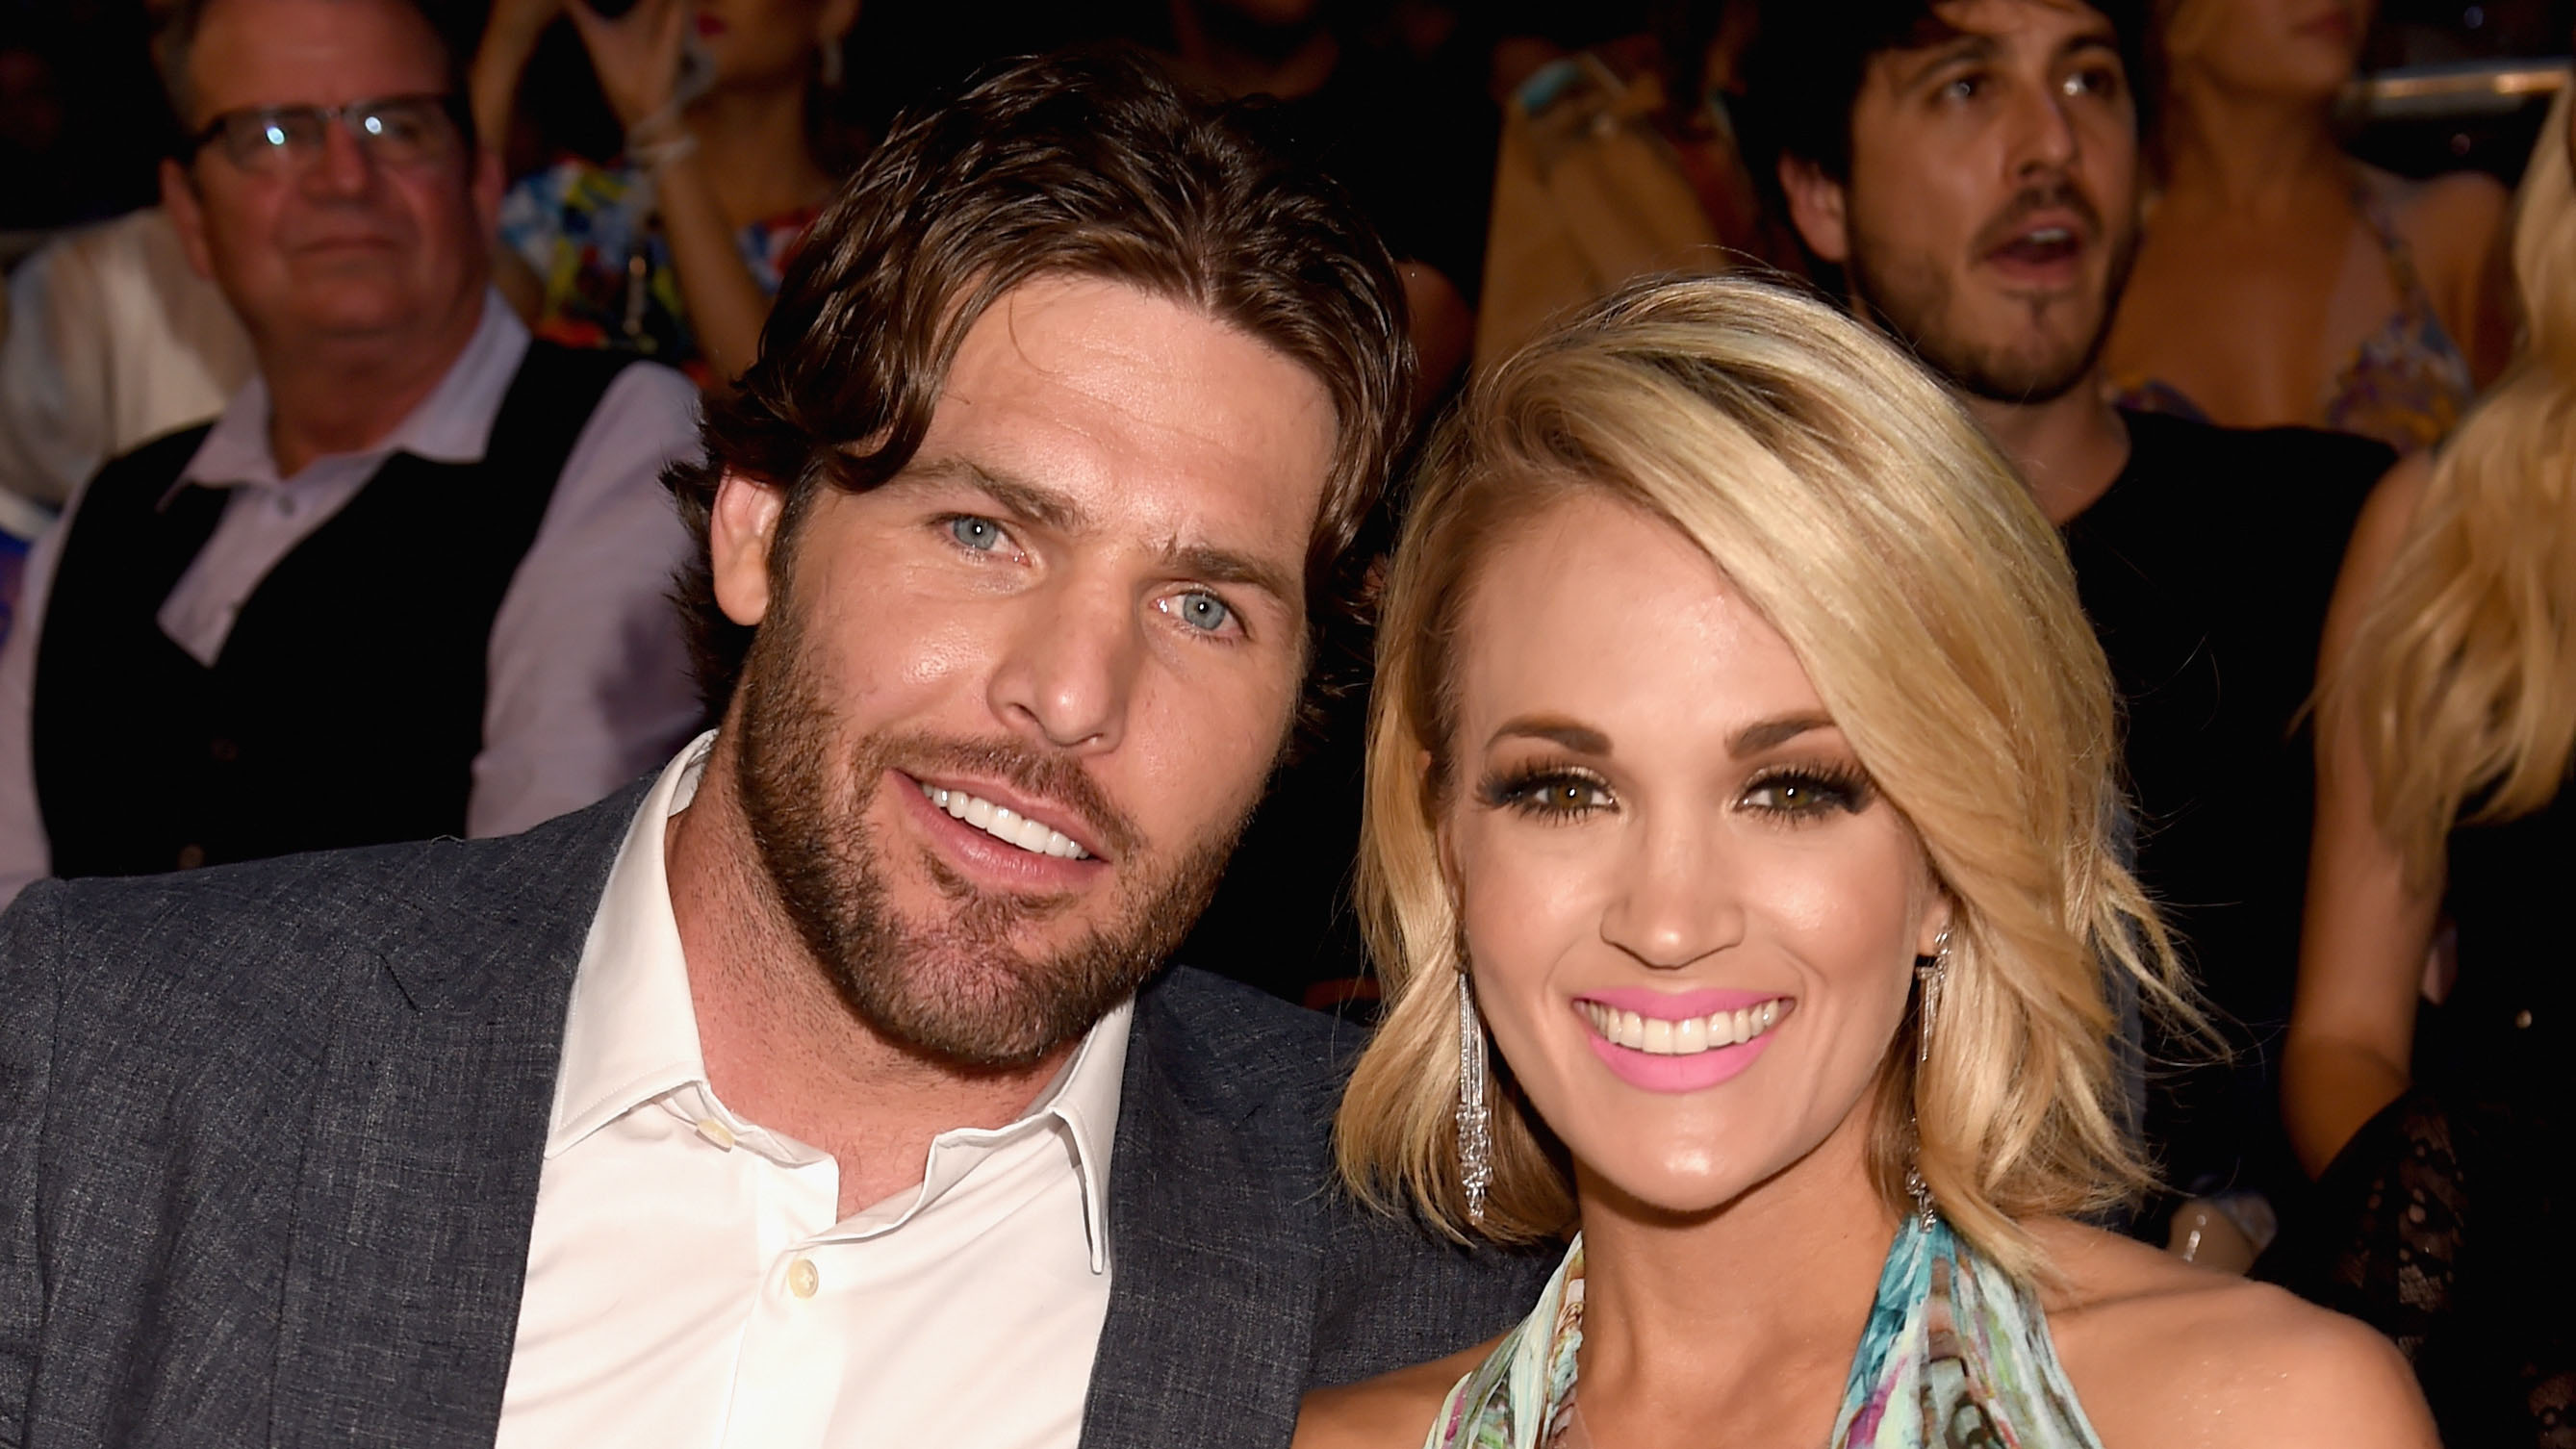 Carrie Underwood Brings Husband Mike Fisher As Her Date To CMA Awards